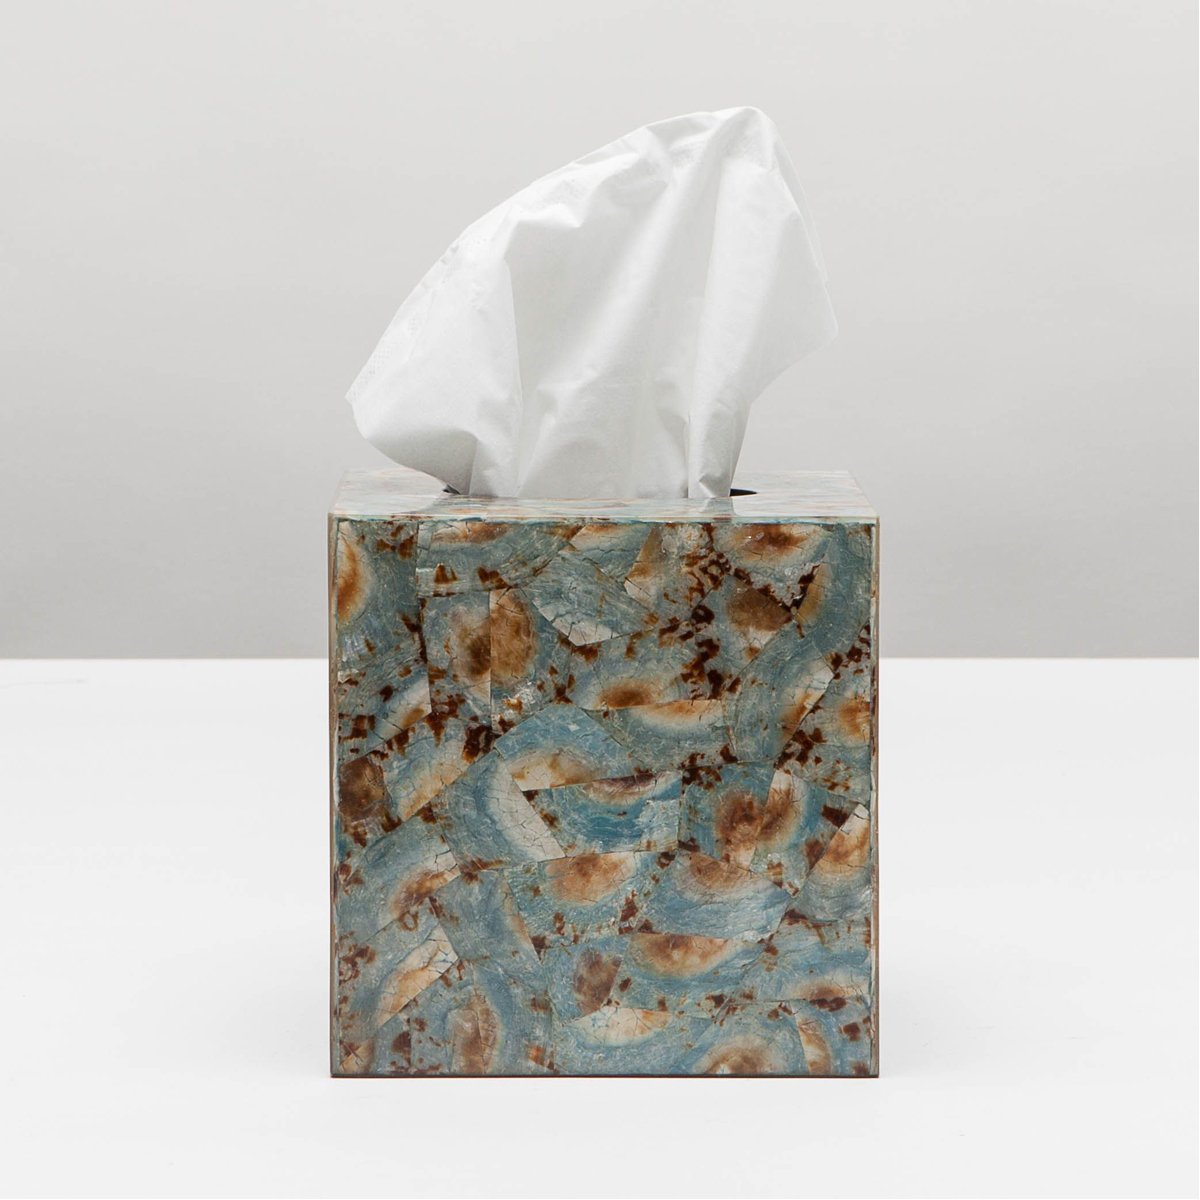 Pigeon and Poodle Sitges Tissue Box, Square